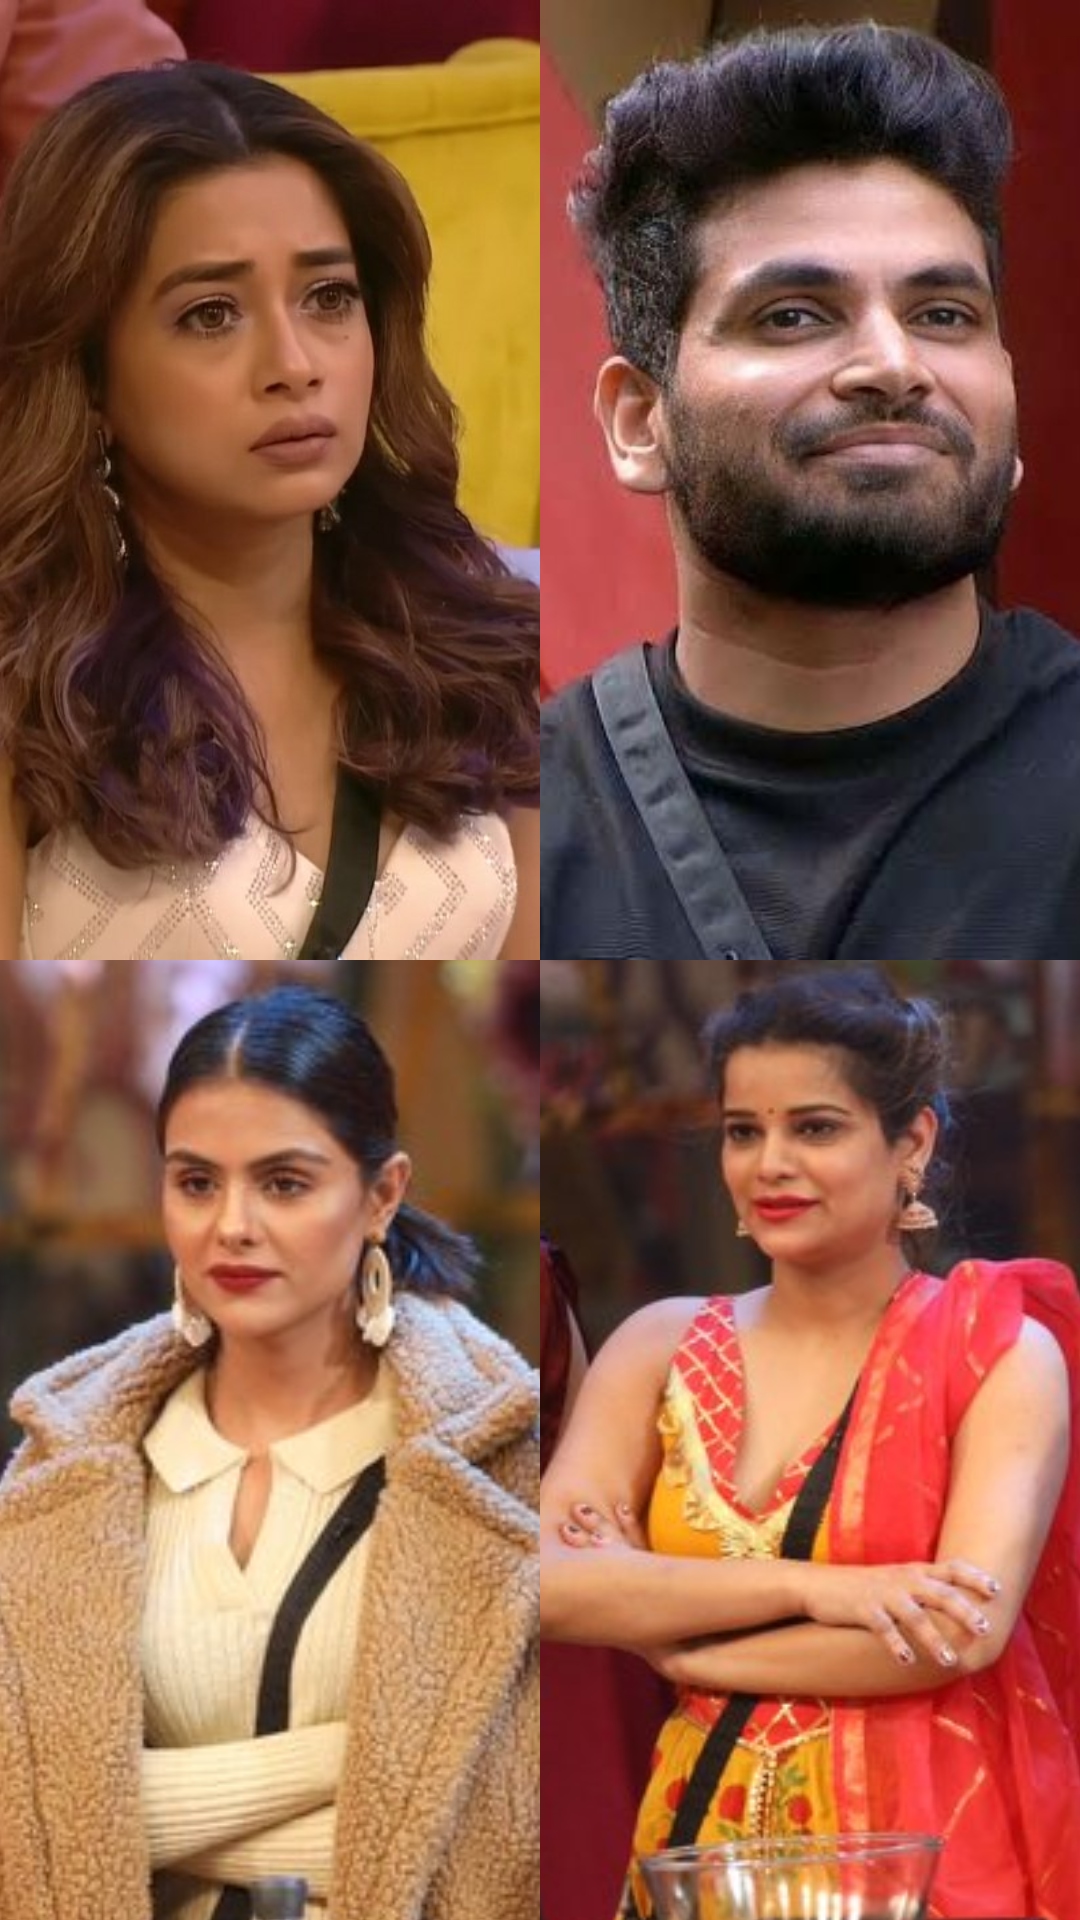 After Sajid Khan's exits, Tina Datta, Shiv Thakare, Priyanka Chahar Choudhary and other contestants to compete for Bigg Boss 16 trophy. 